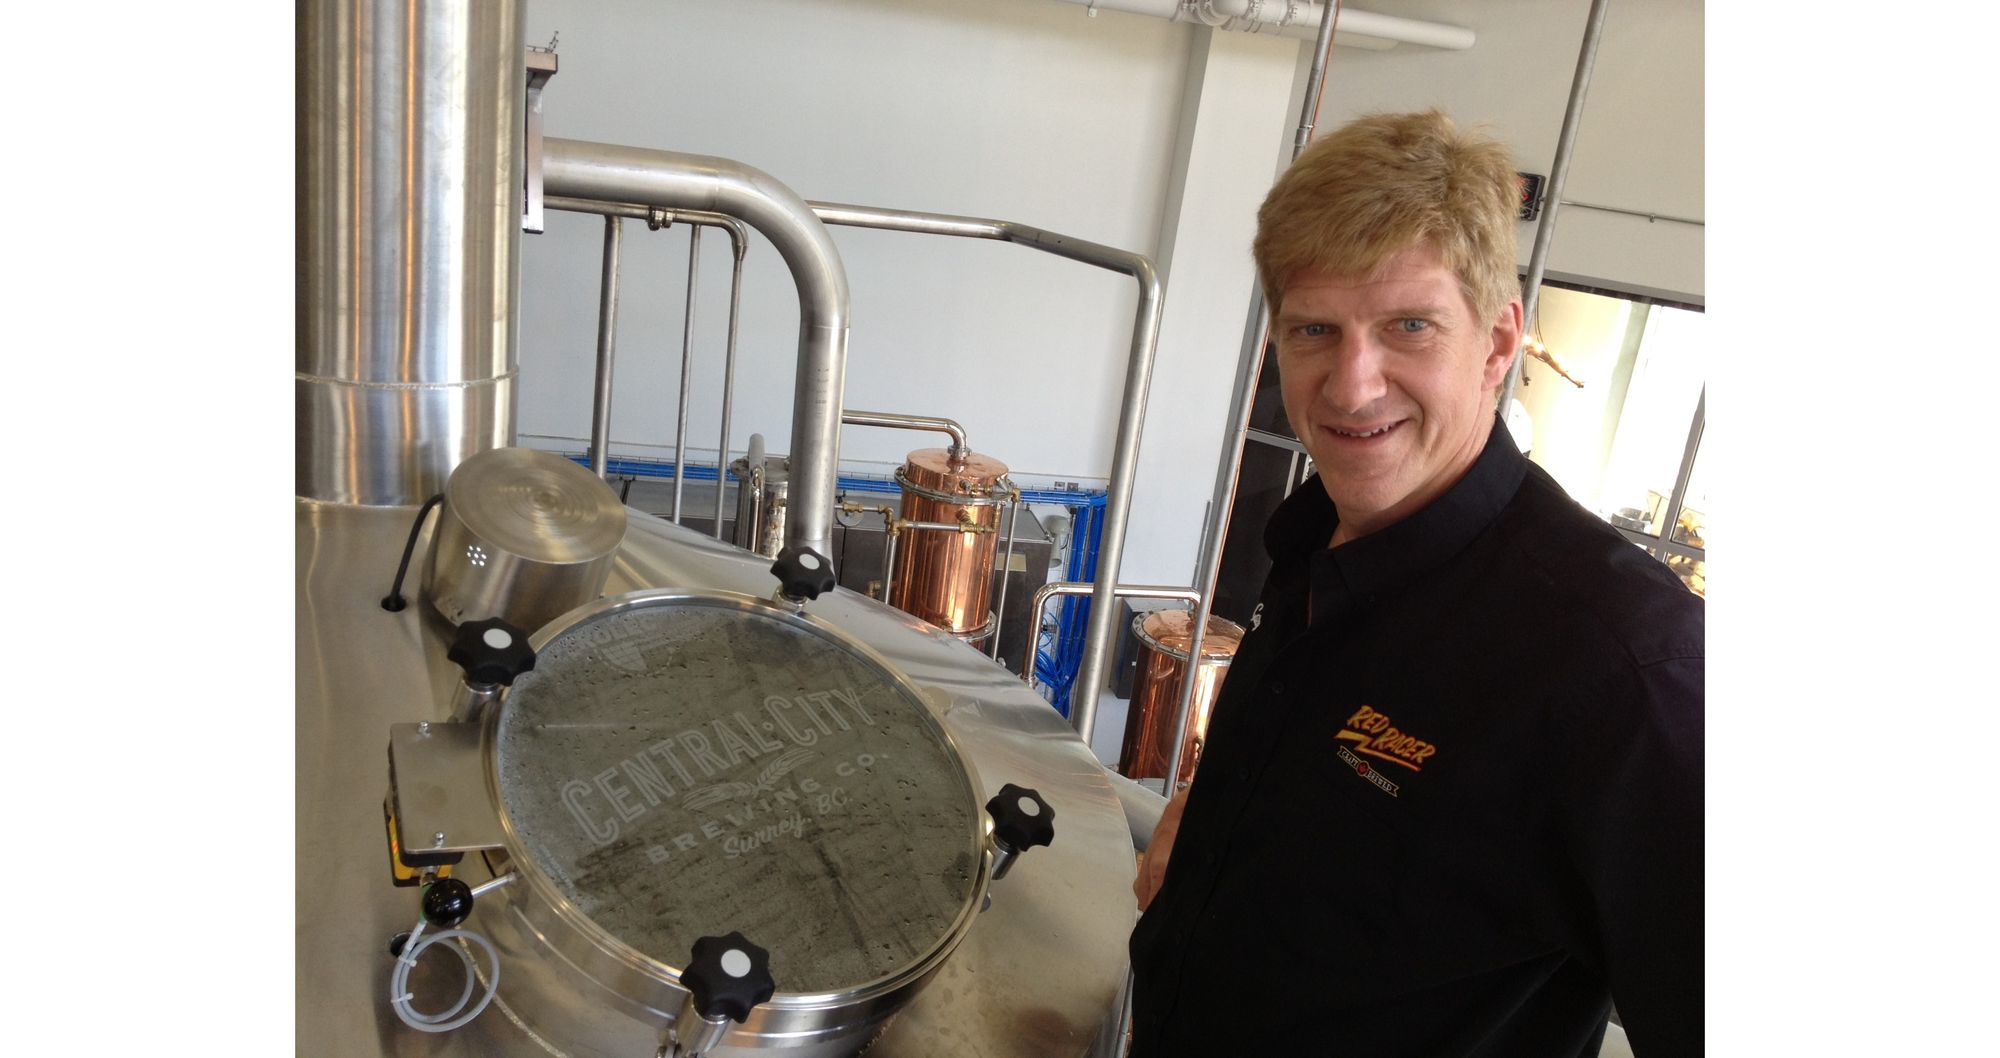 Passion Fuels - Central City Brewers and Distillers